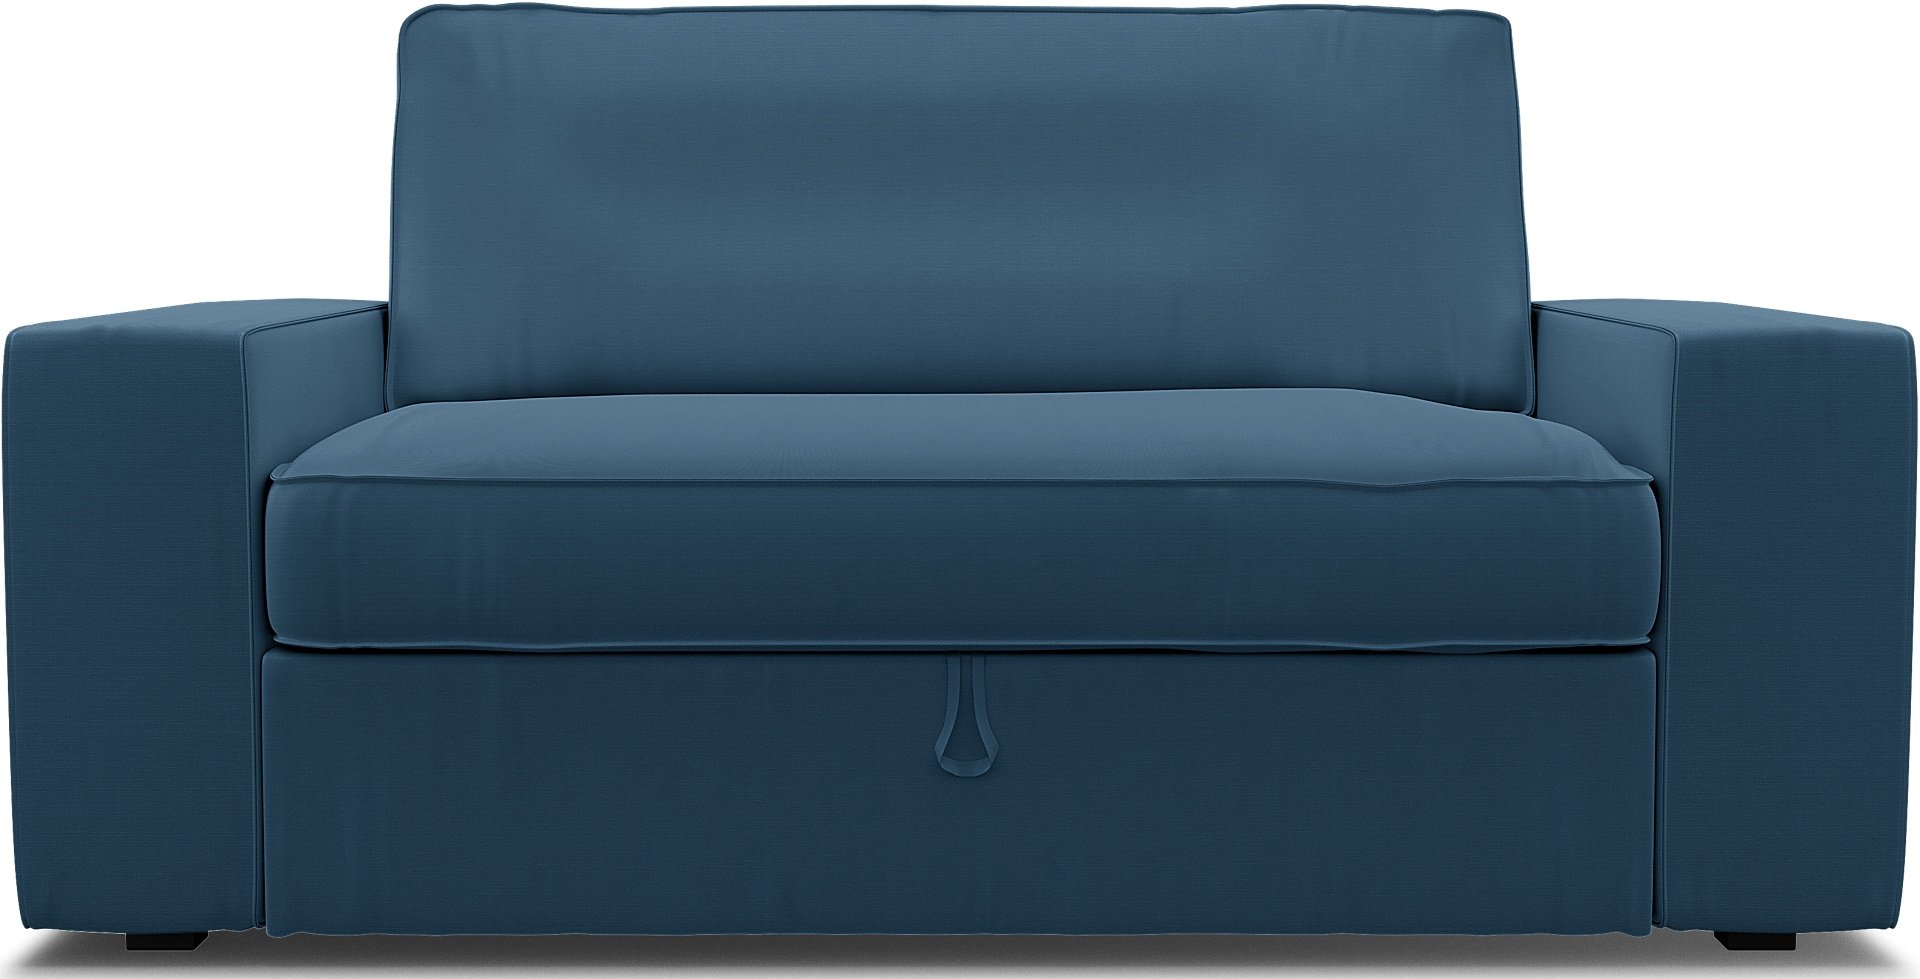 IKEA - Vilasund 2 seater sofa bed cover, Real Teal, Cotton - Bemz